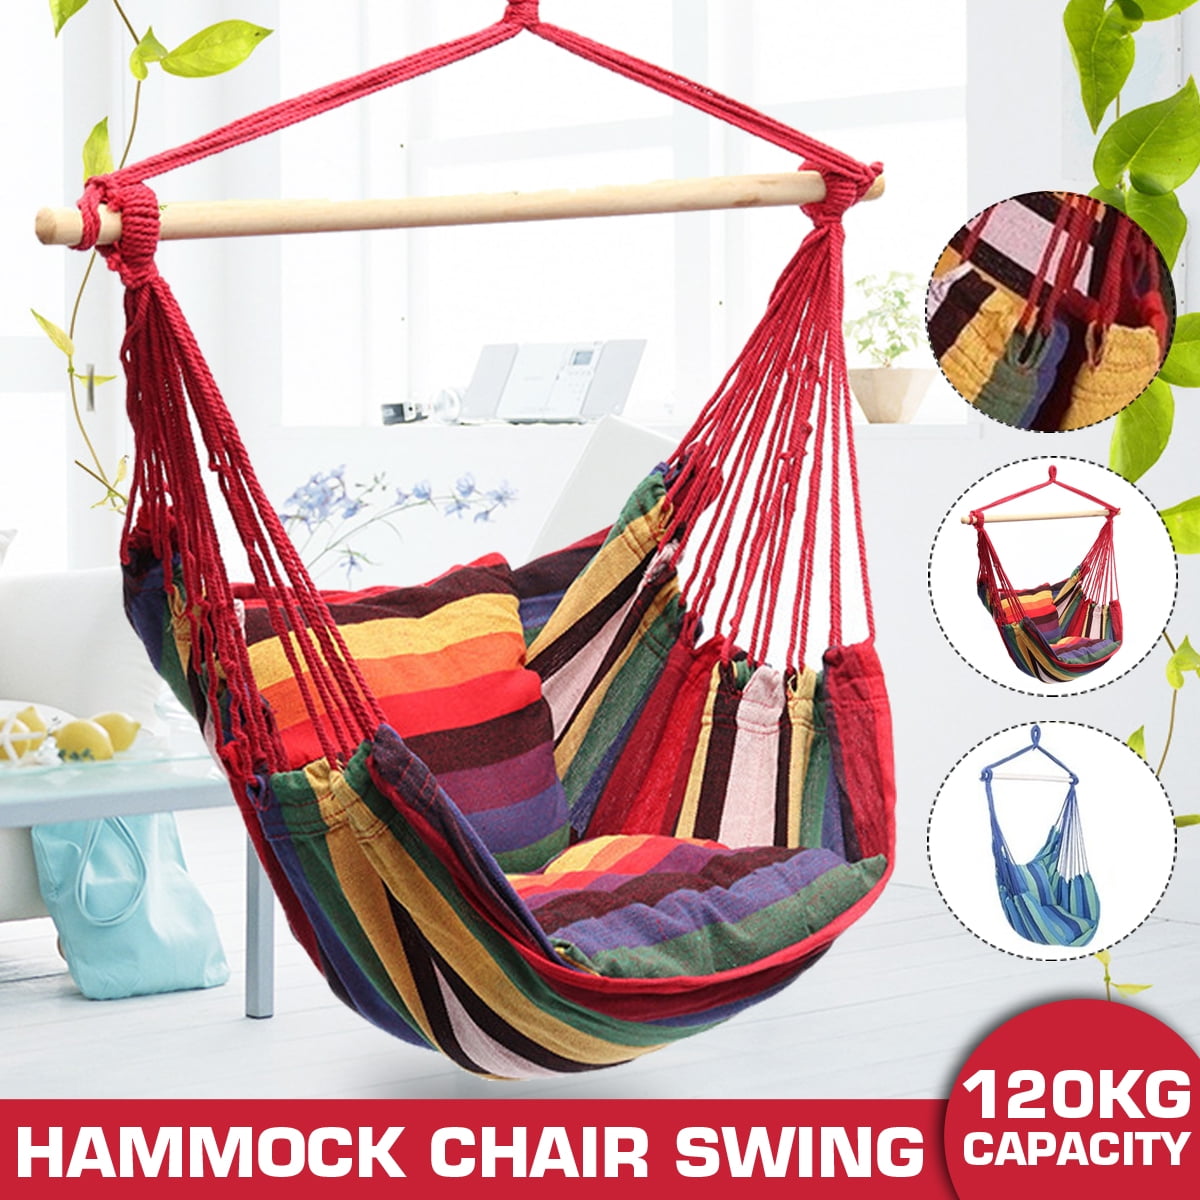 Amazing-Max 500 lbs! Hammock Chair Hanging Swing Chair Hanging Rope Swing-2  Seat Cushions Included-Quality Cotton Weave for Superior Comfort &  Durability 